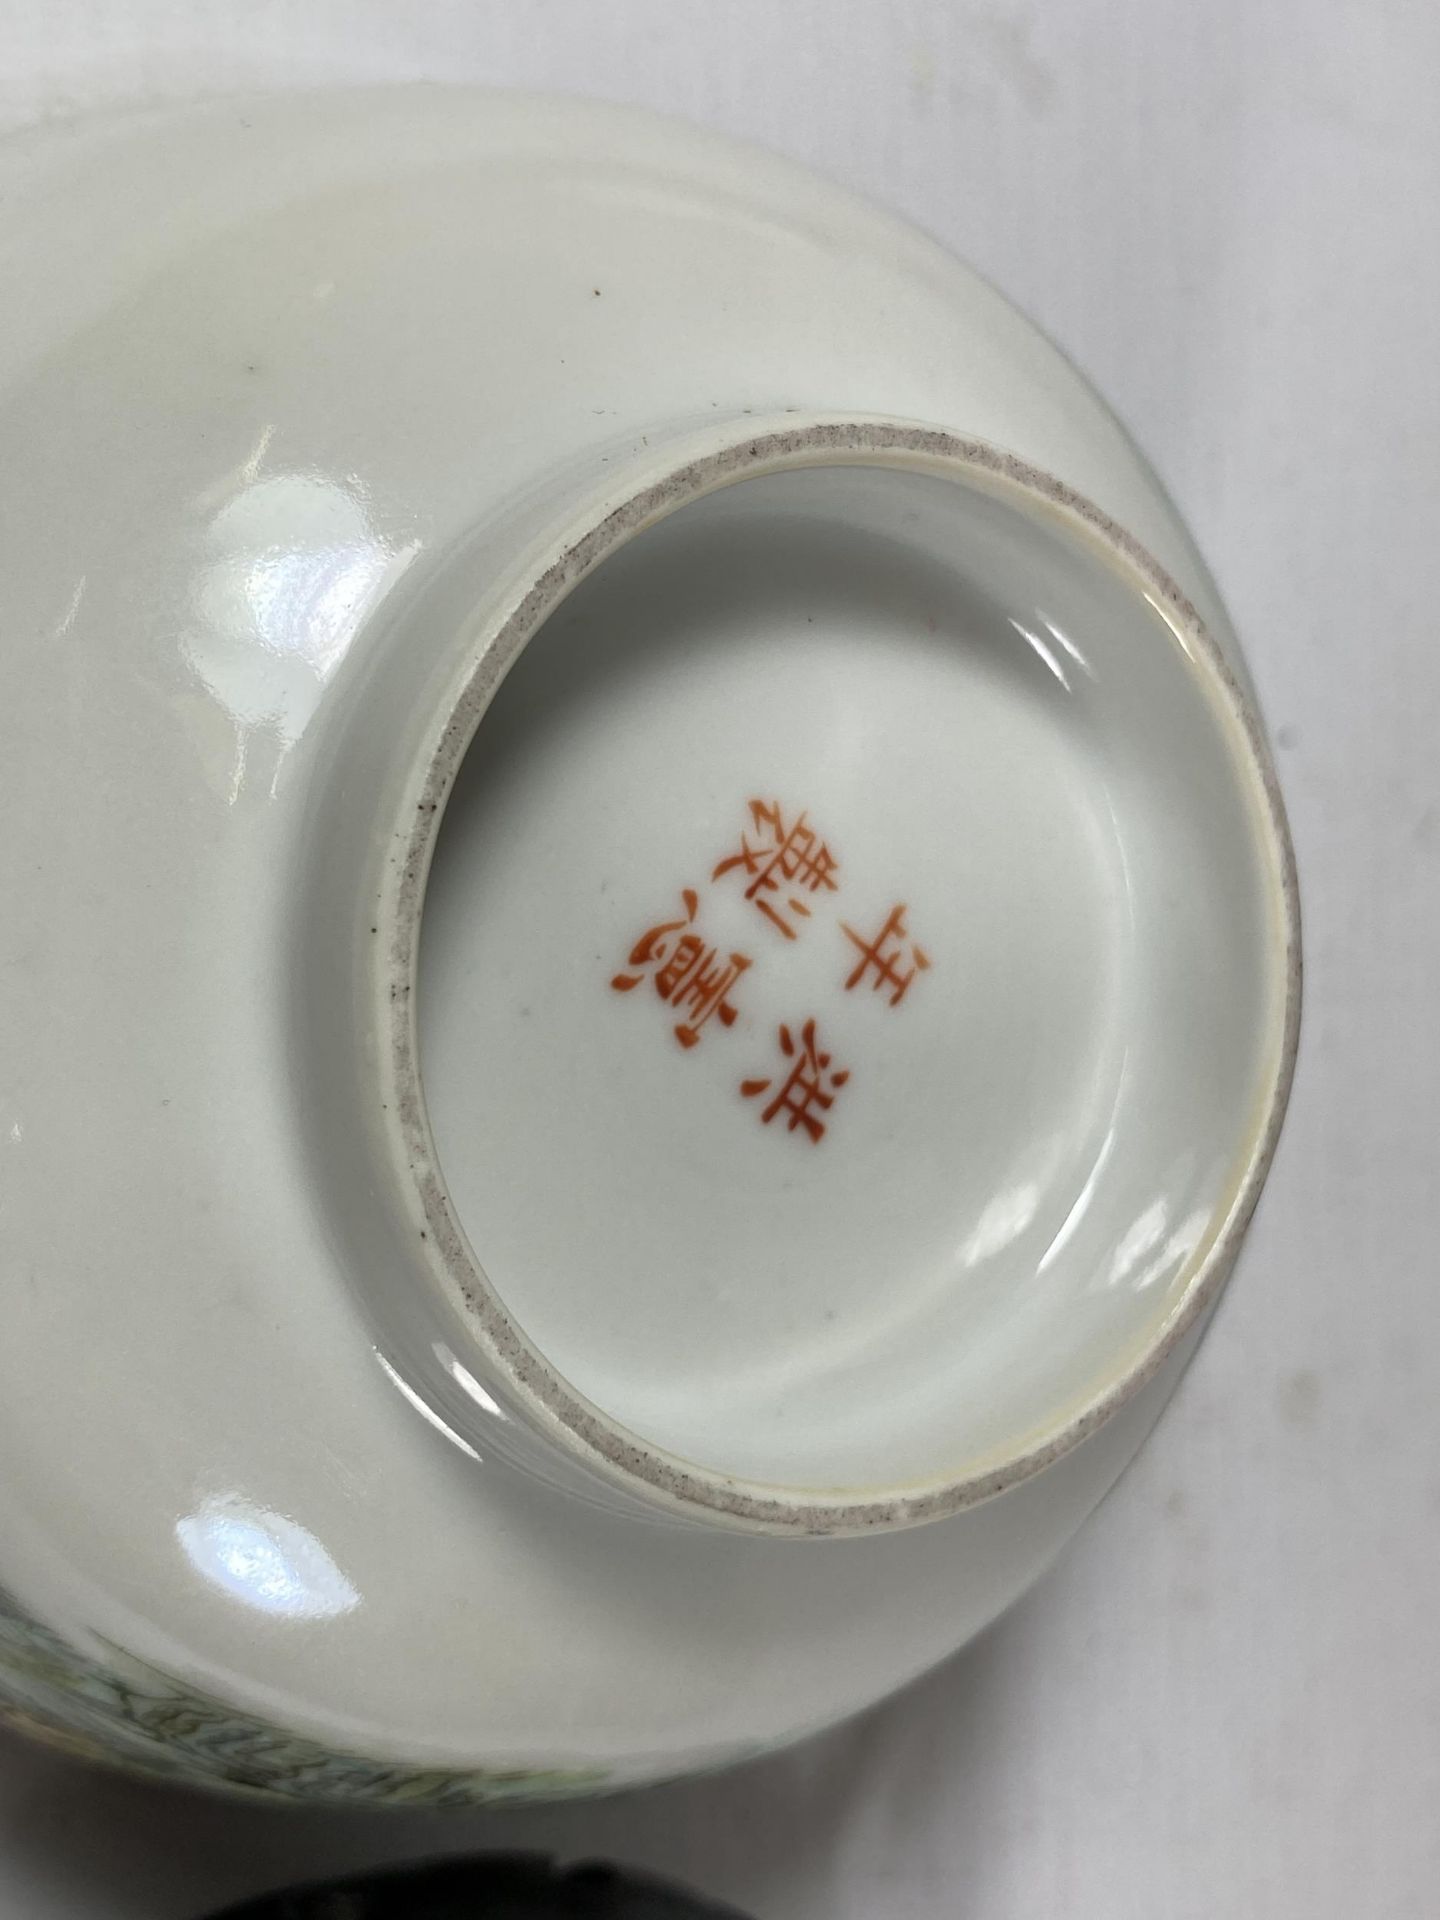 AN EARLY 20TH CENTURY CHINESE PORCELAIN BOWL ON WOODEN STAND, FOUR CHARACTER MARK TO BASE, - Image 5 of 6